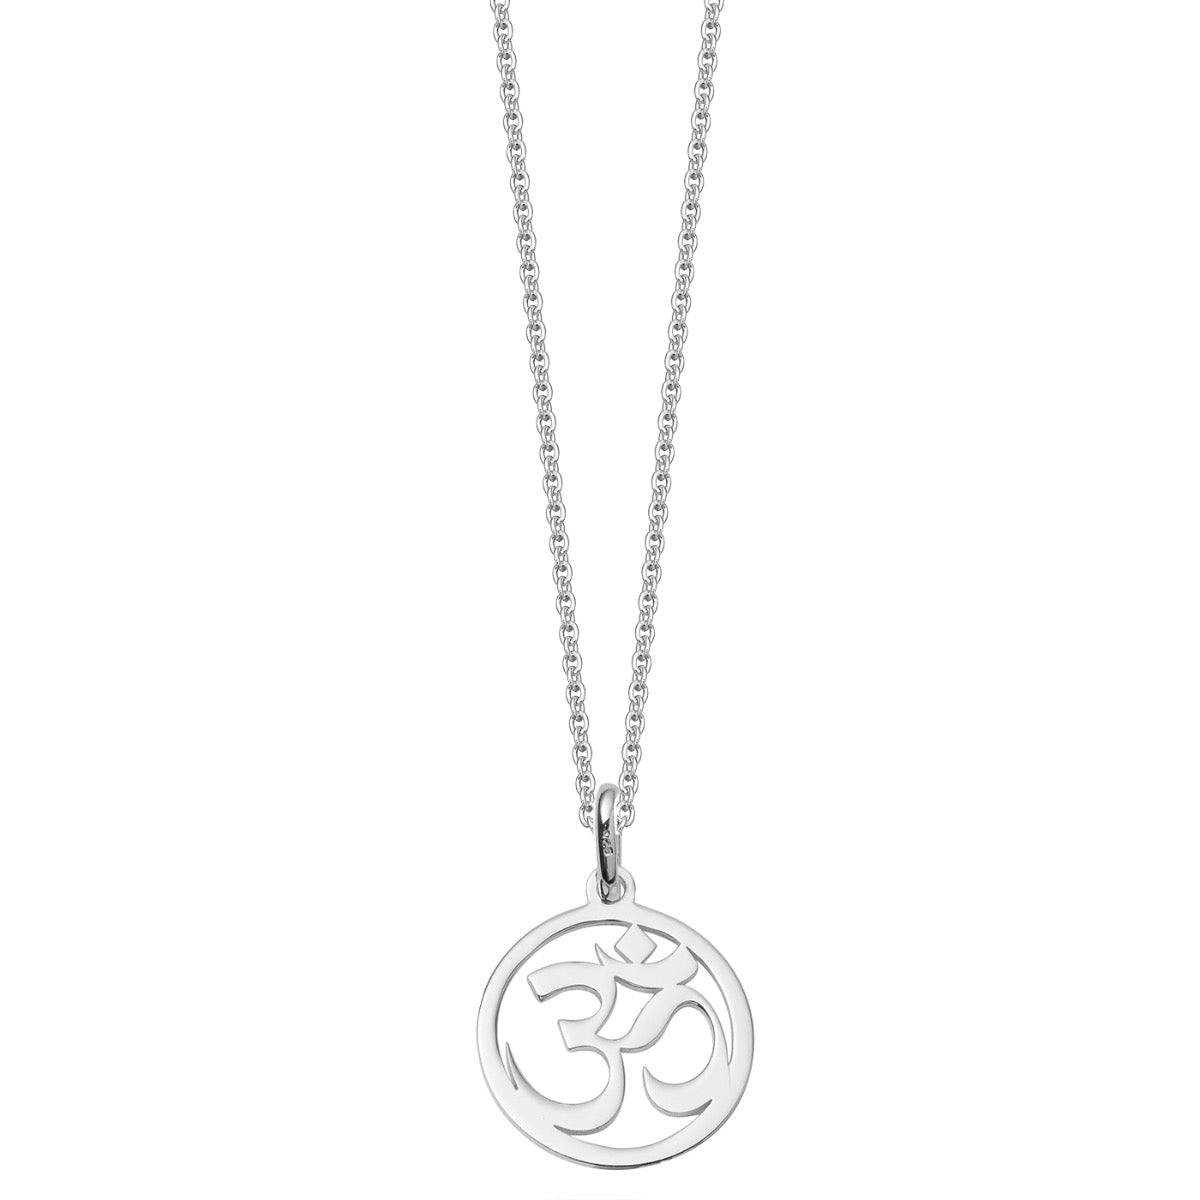 Silver om necklace